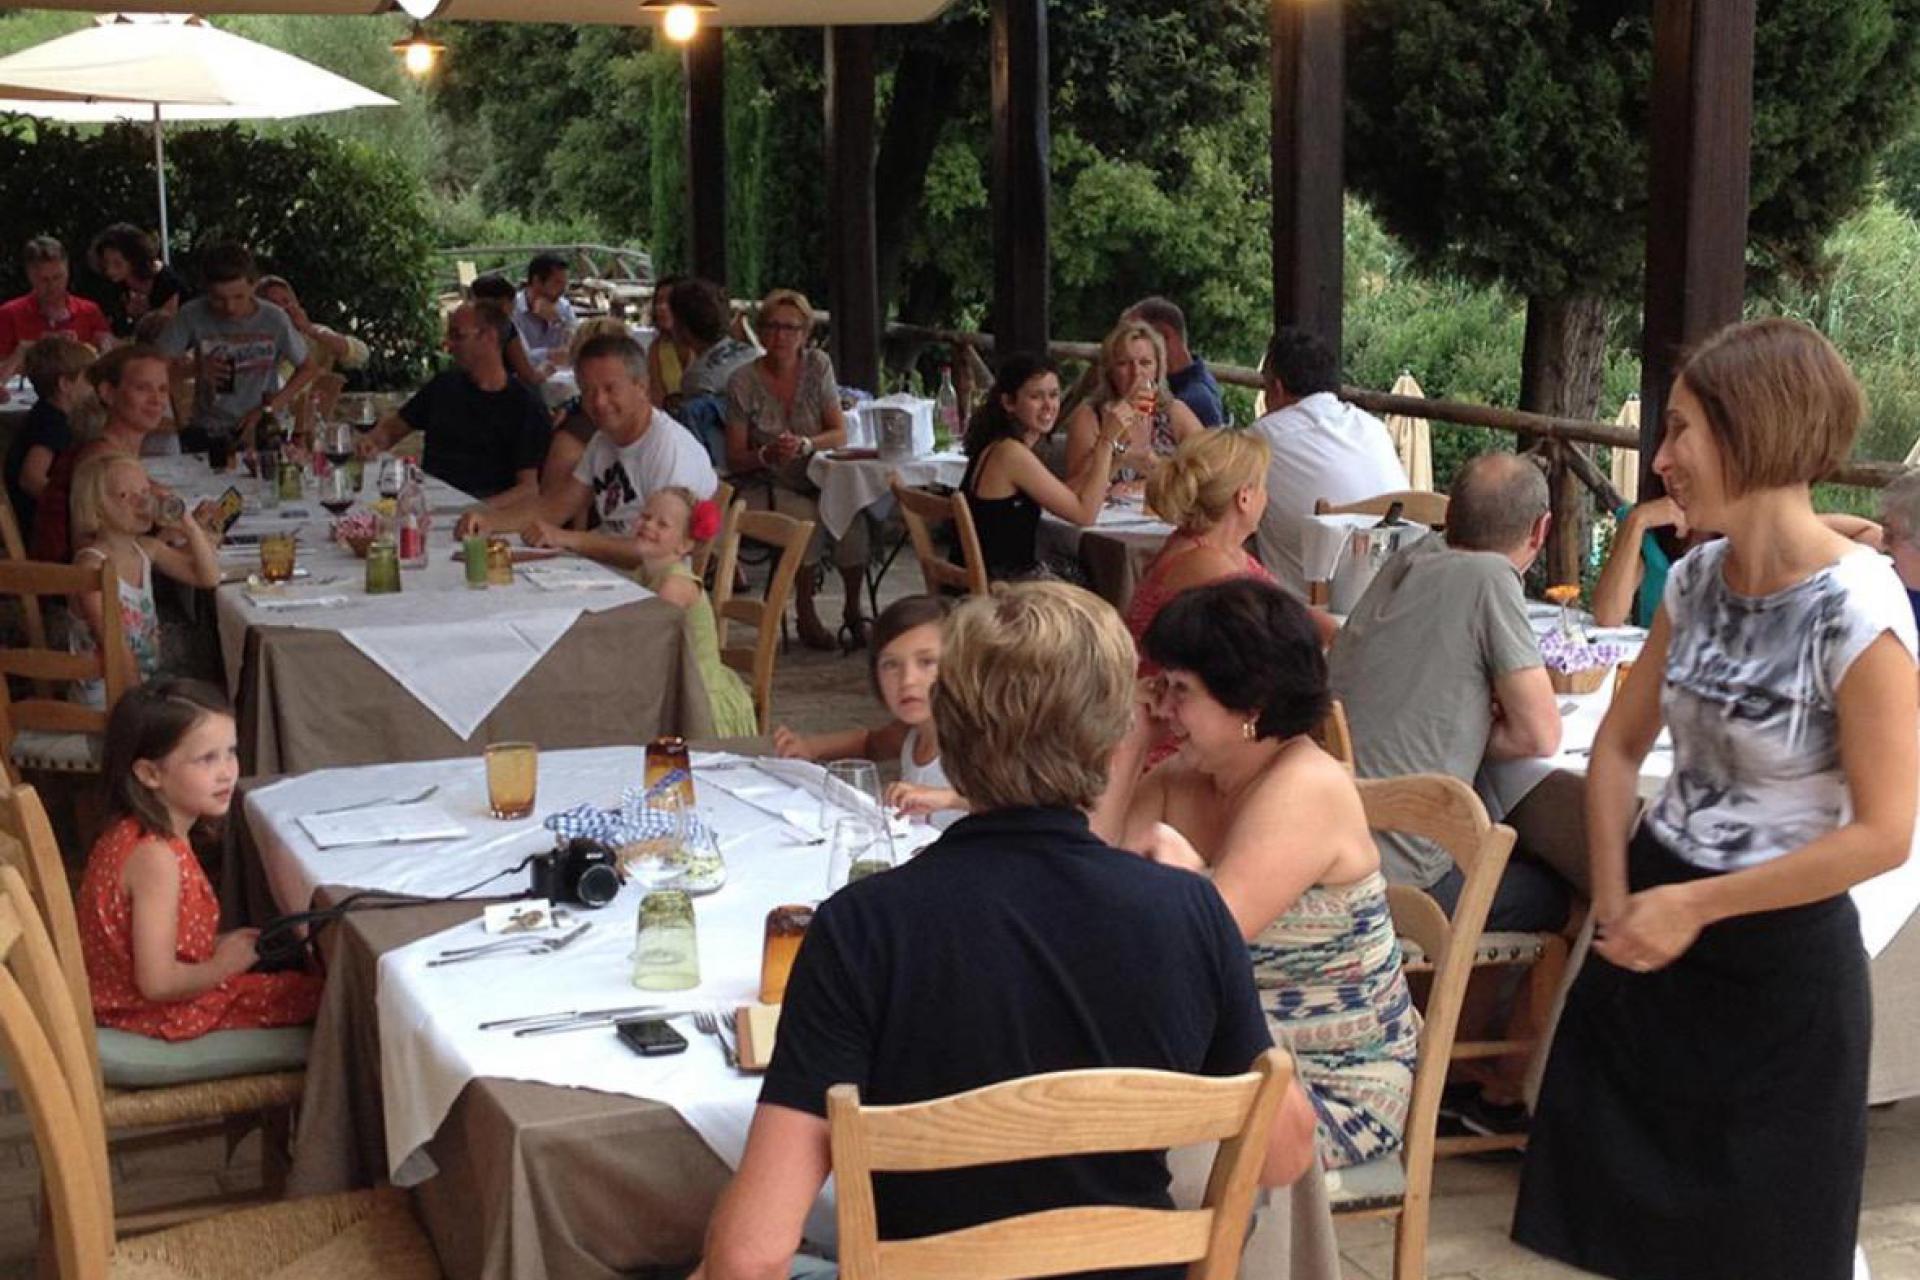 Agriturismo in Tuscany with true Italian hospitality